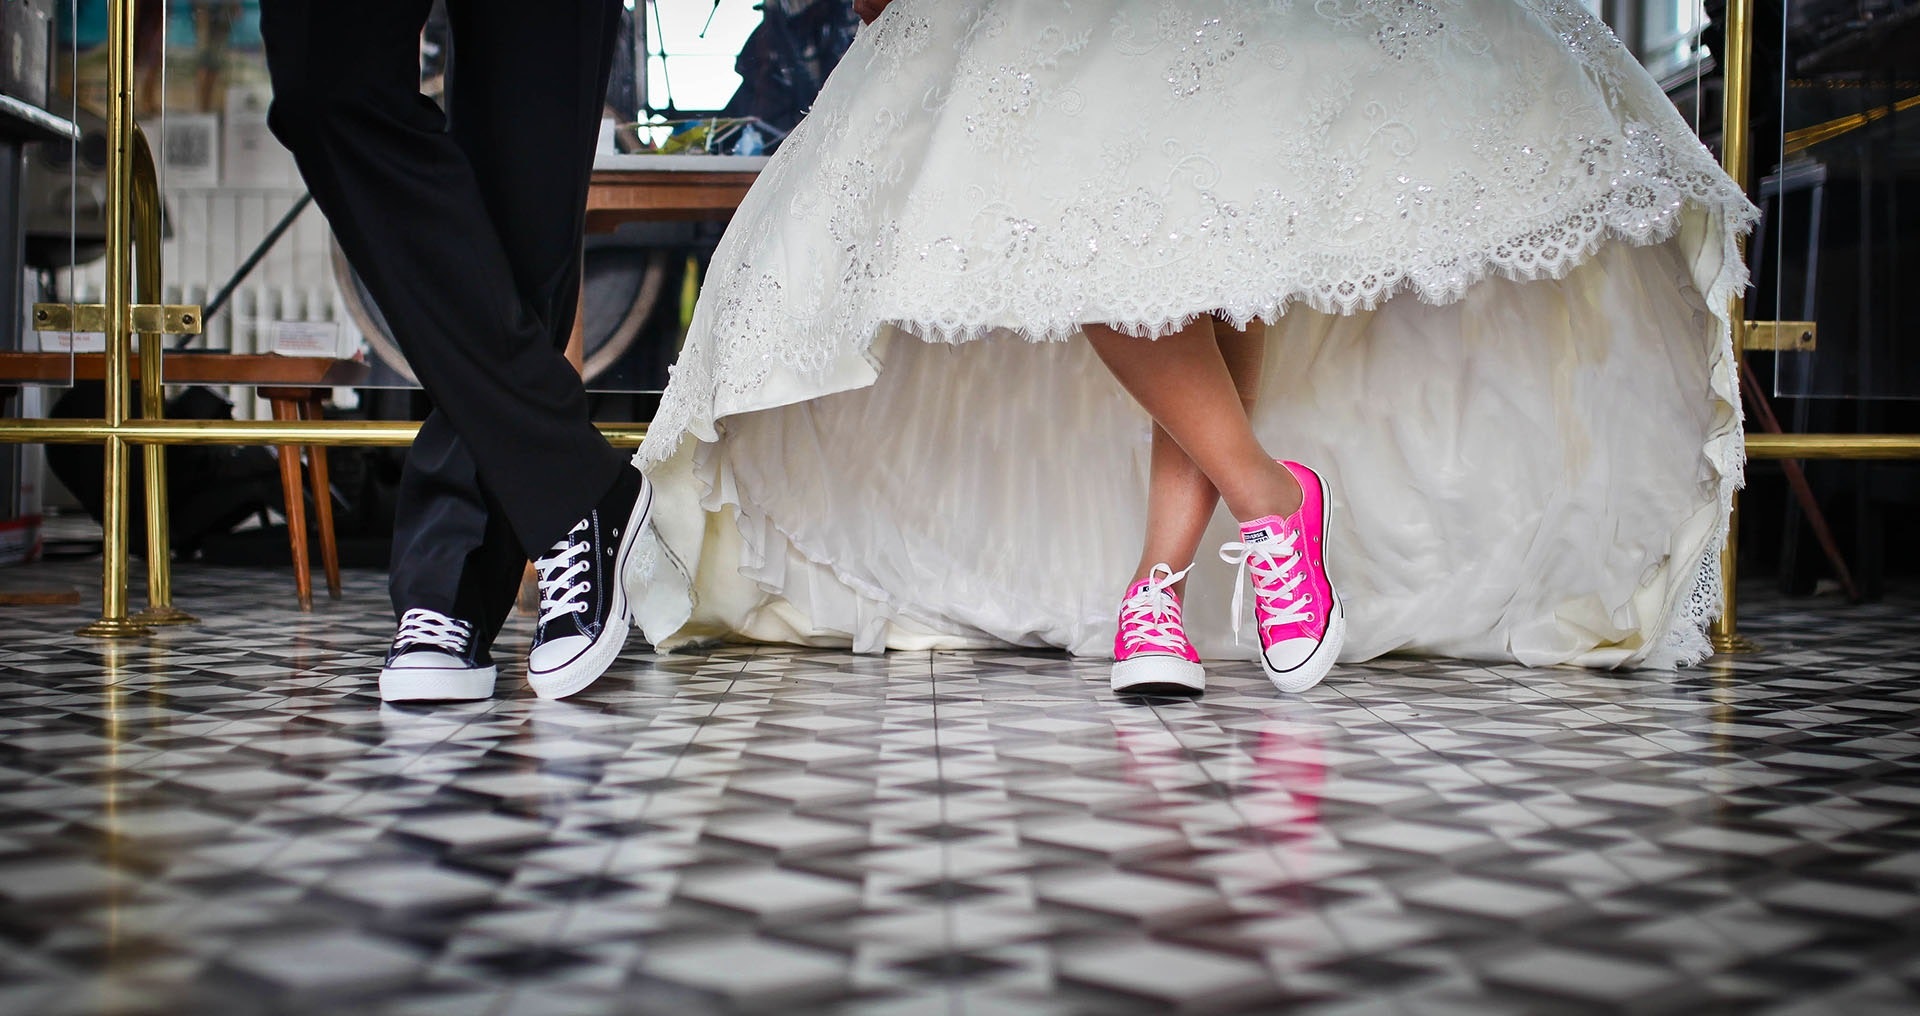 FIVE WAYS TO BUDGET FOR YOUR WEDDING